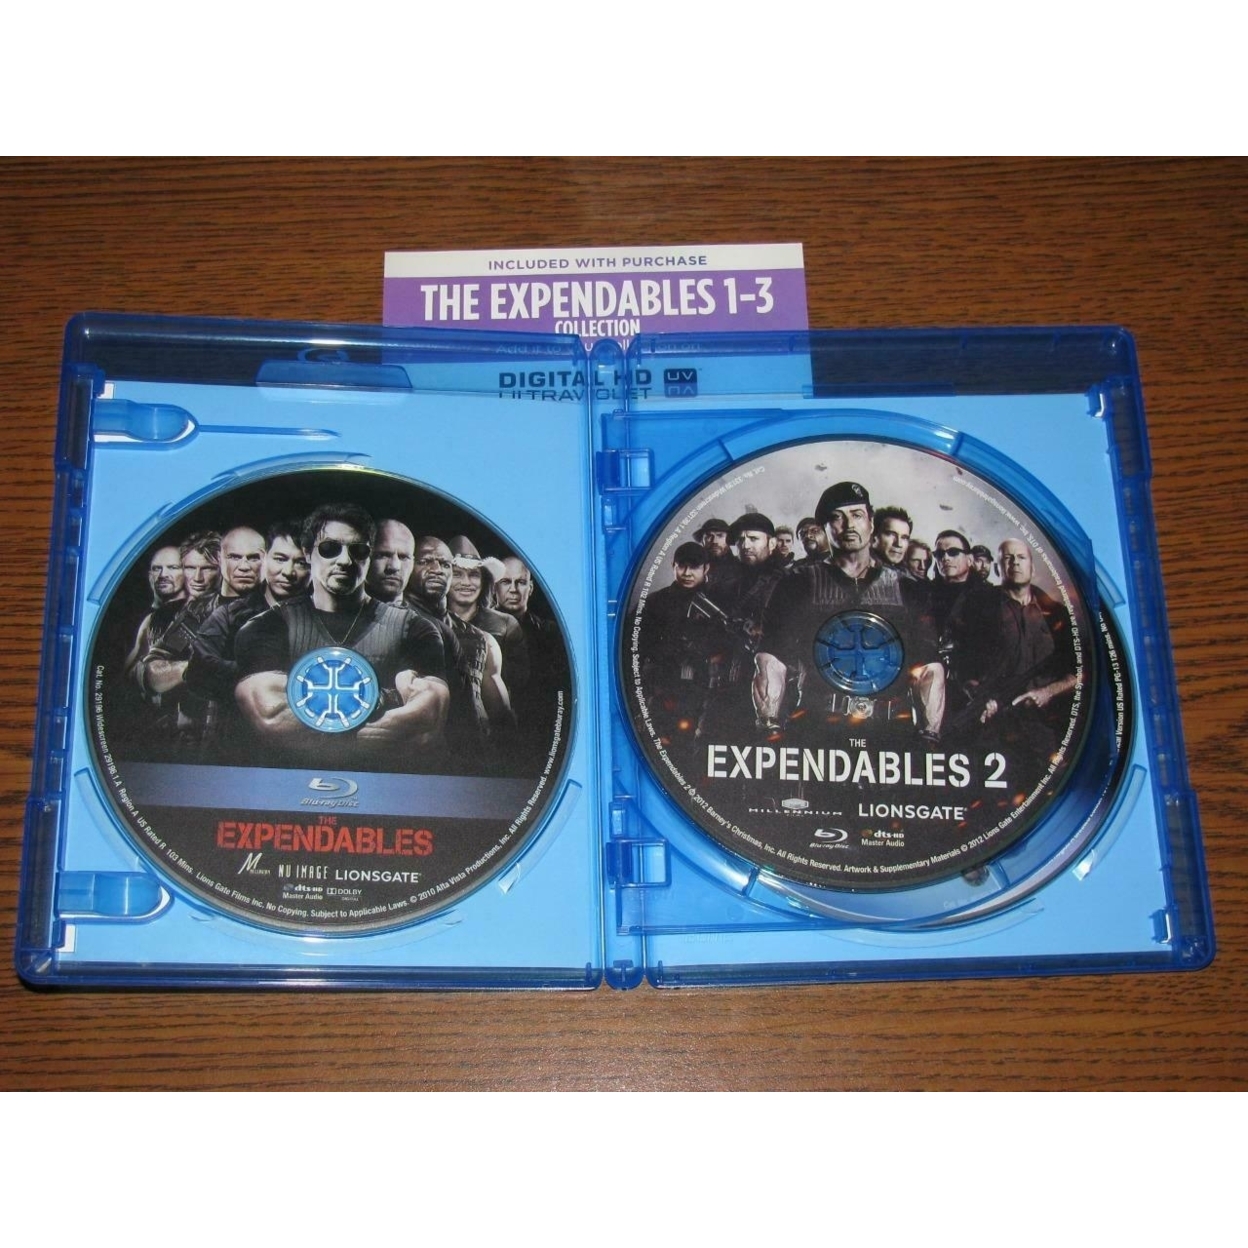 The Expendables 1, 2 & 3: 3-Film Collection (Blu-ray), Lions Gate, Action & Adventure - image 2 of 4